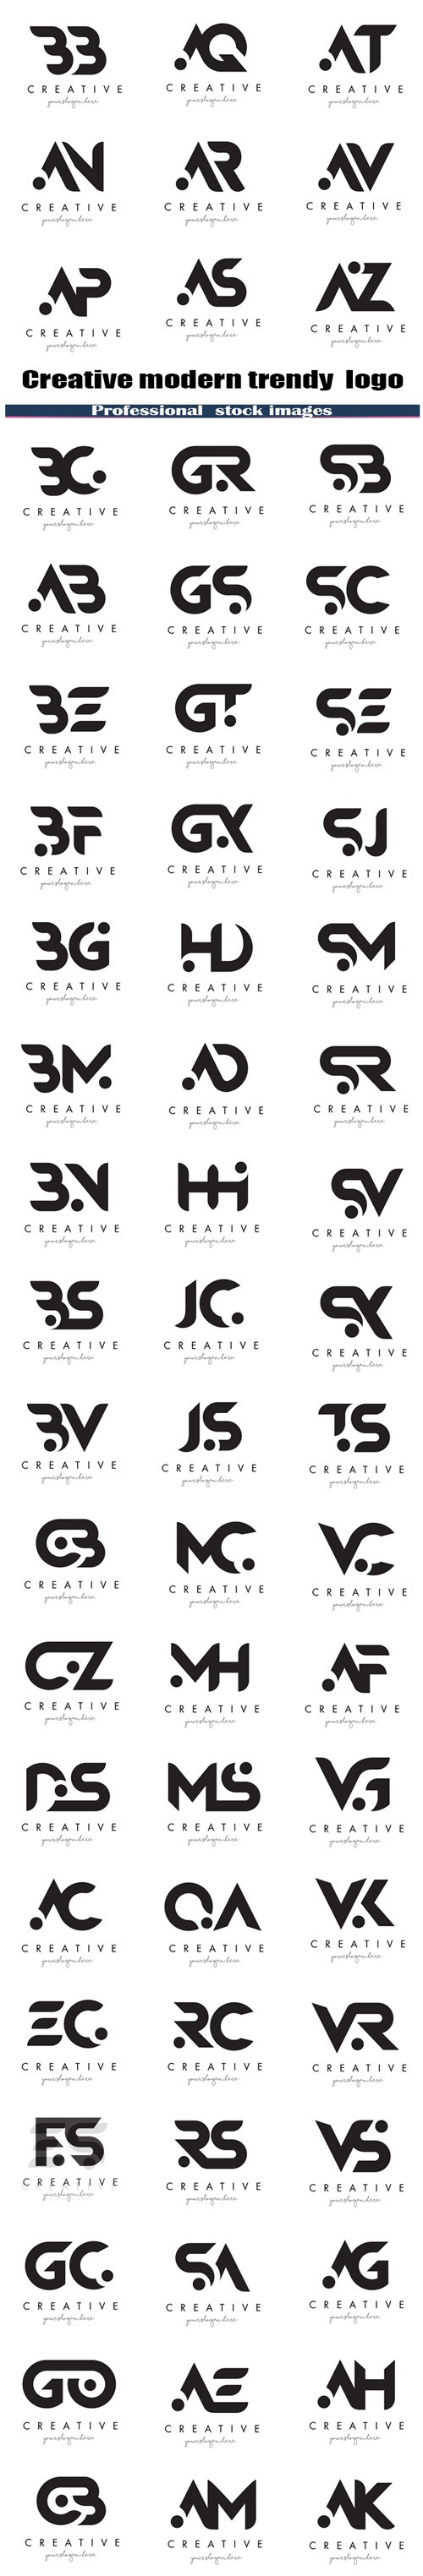 Letter logo design with creative modern trendy typography